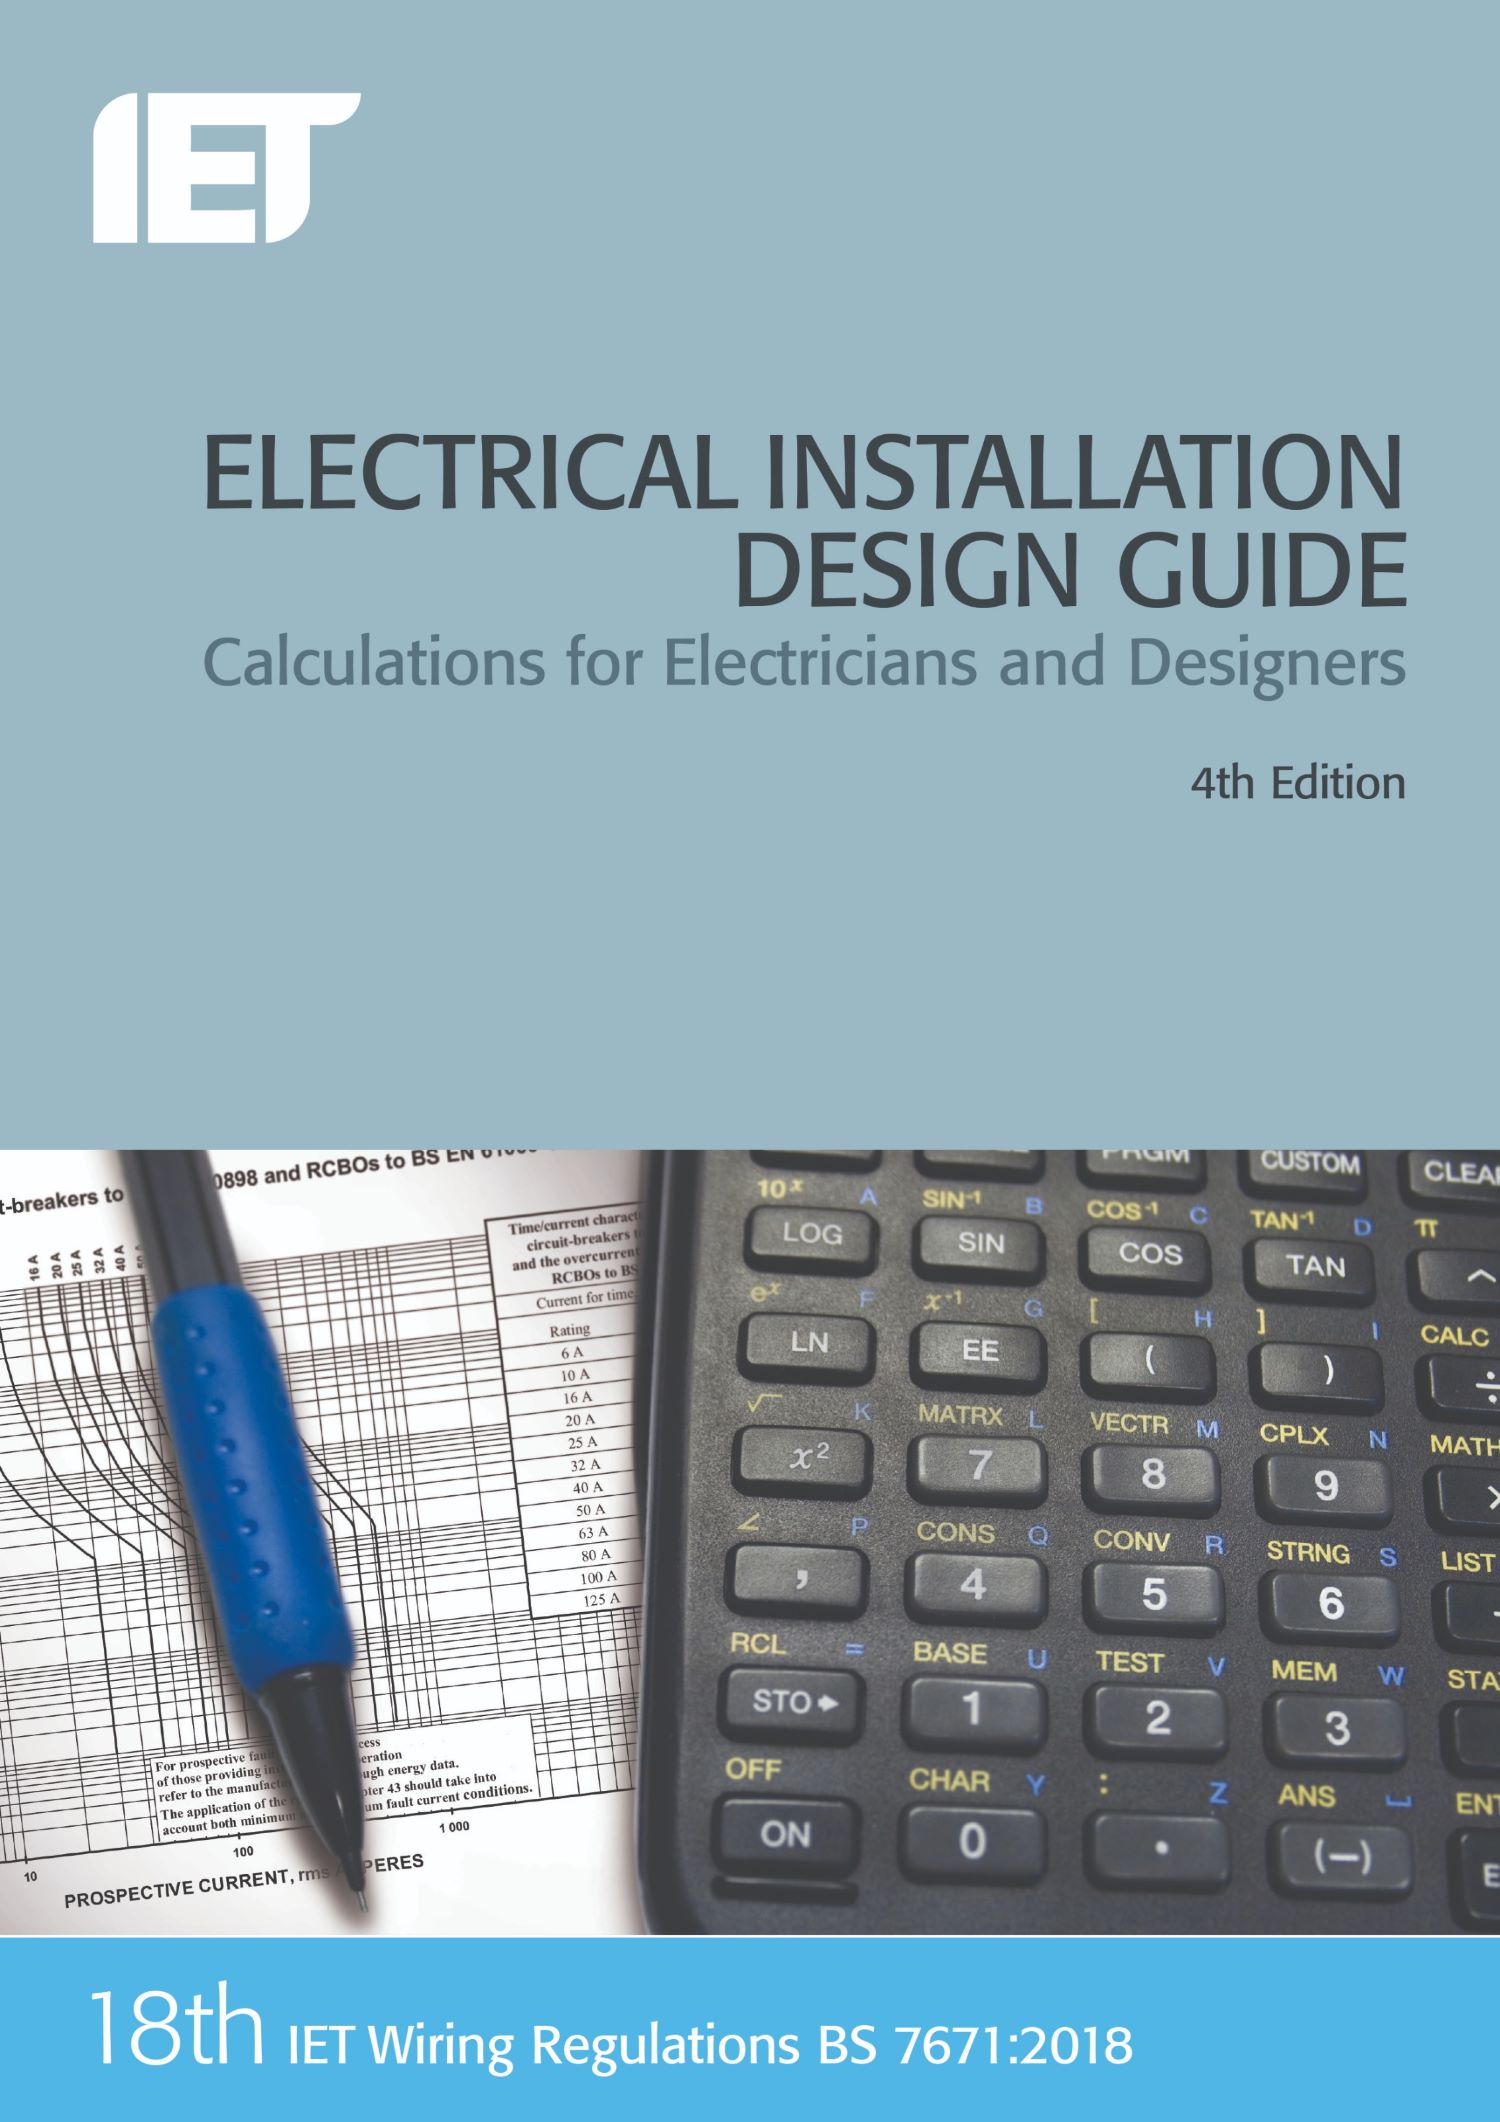 Electrical Installation Design Guide, Calculations for Electricians and Designers, 4th Edition